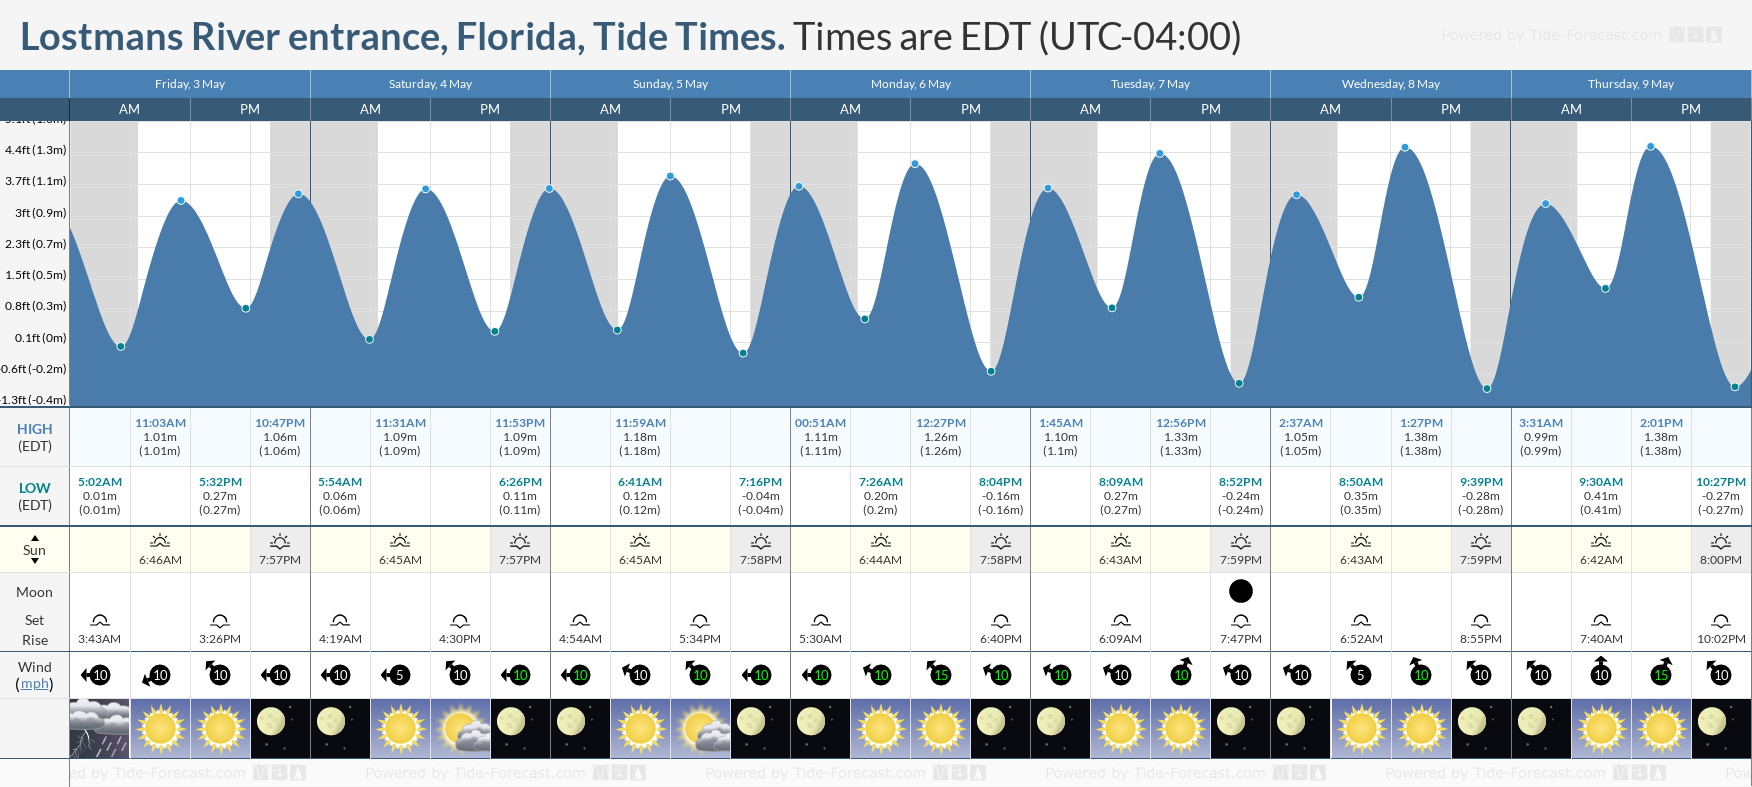 Lostmans River entrance, Florida Tide Chart including high and low tide tide times for the next 7 days